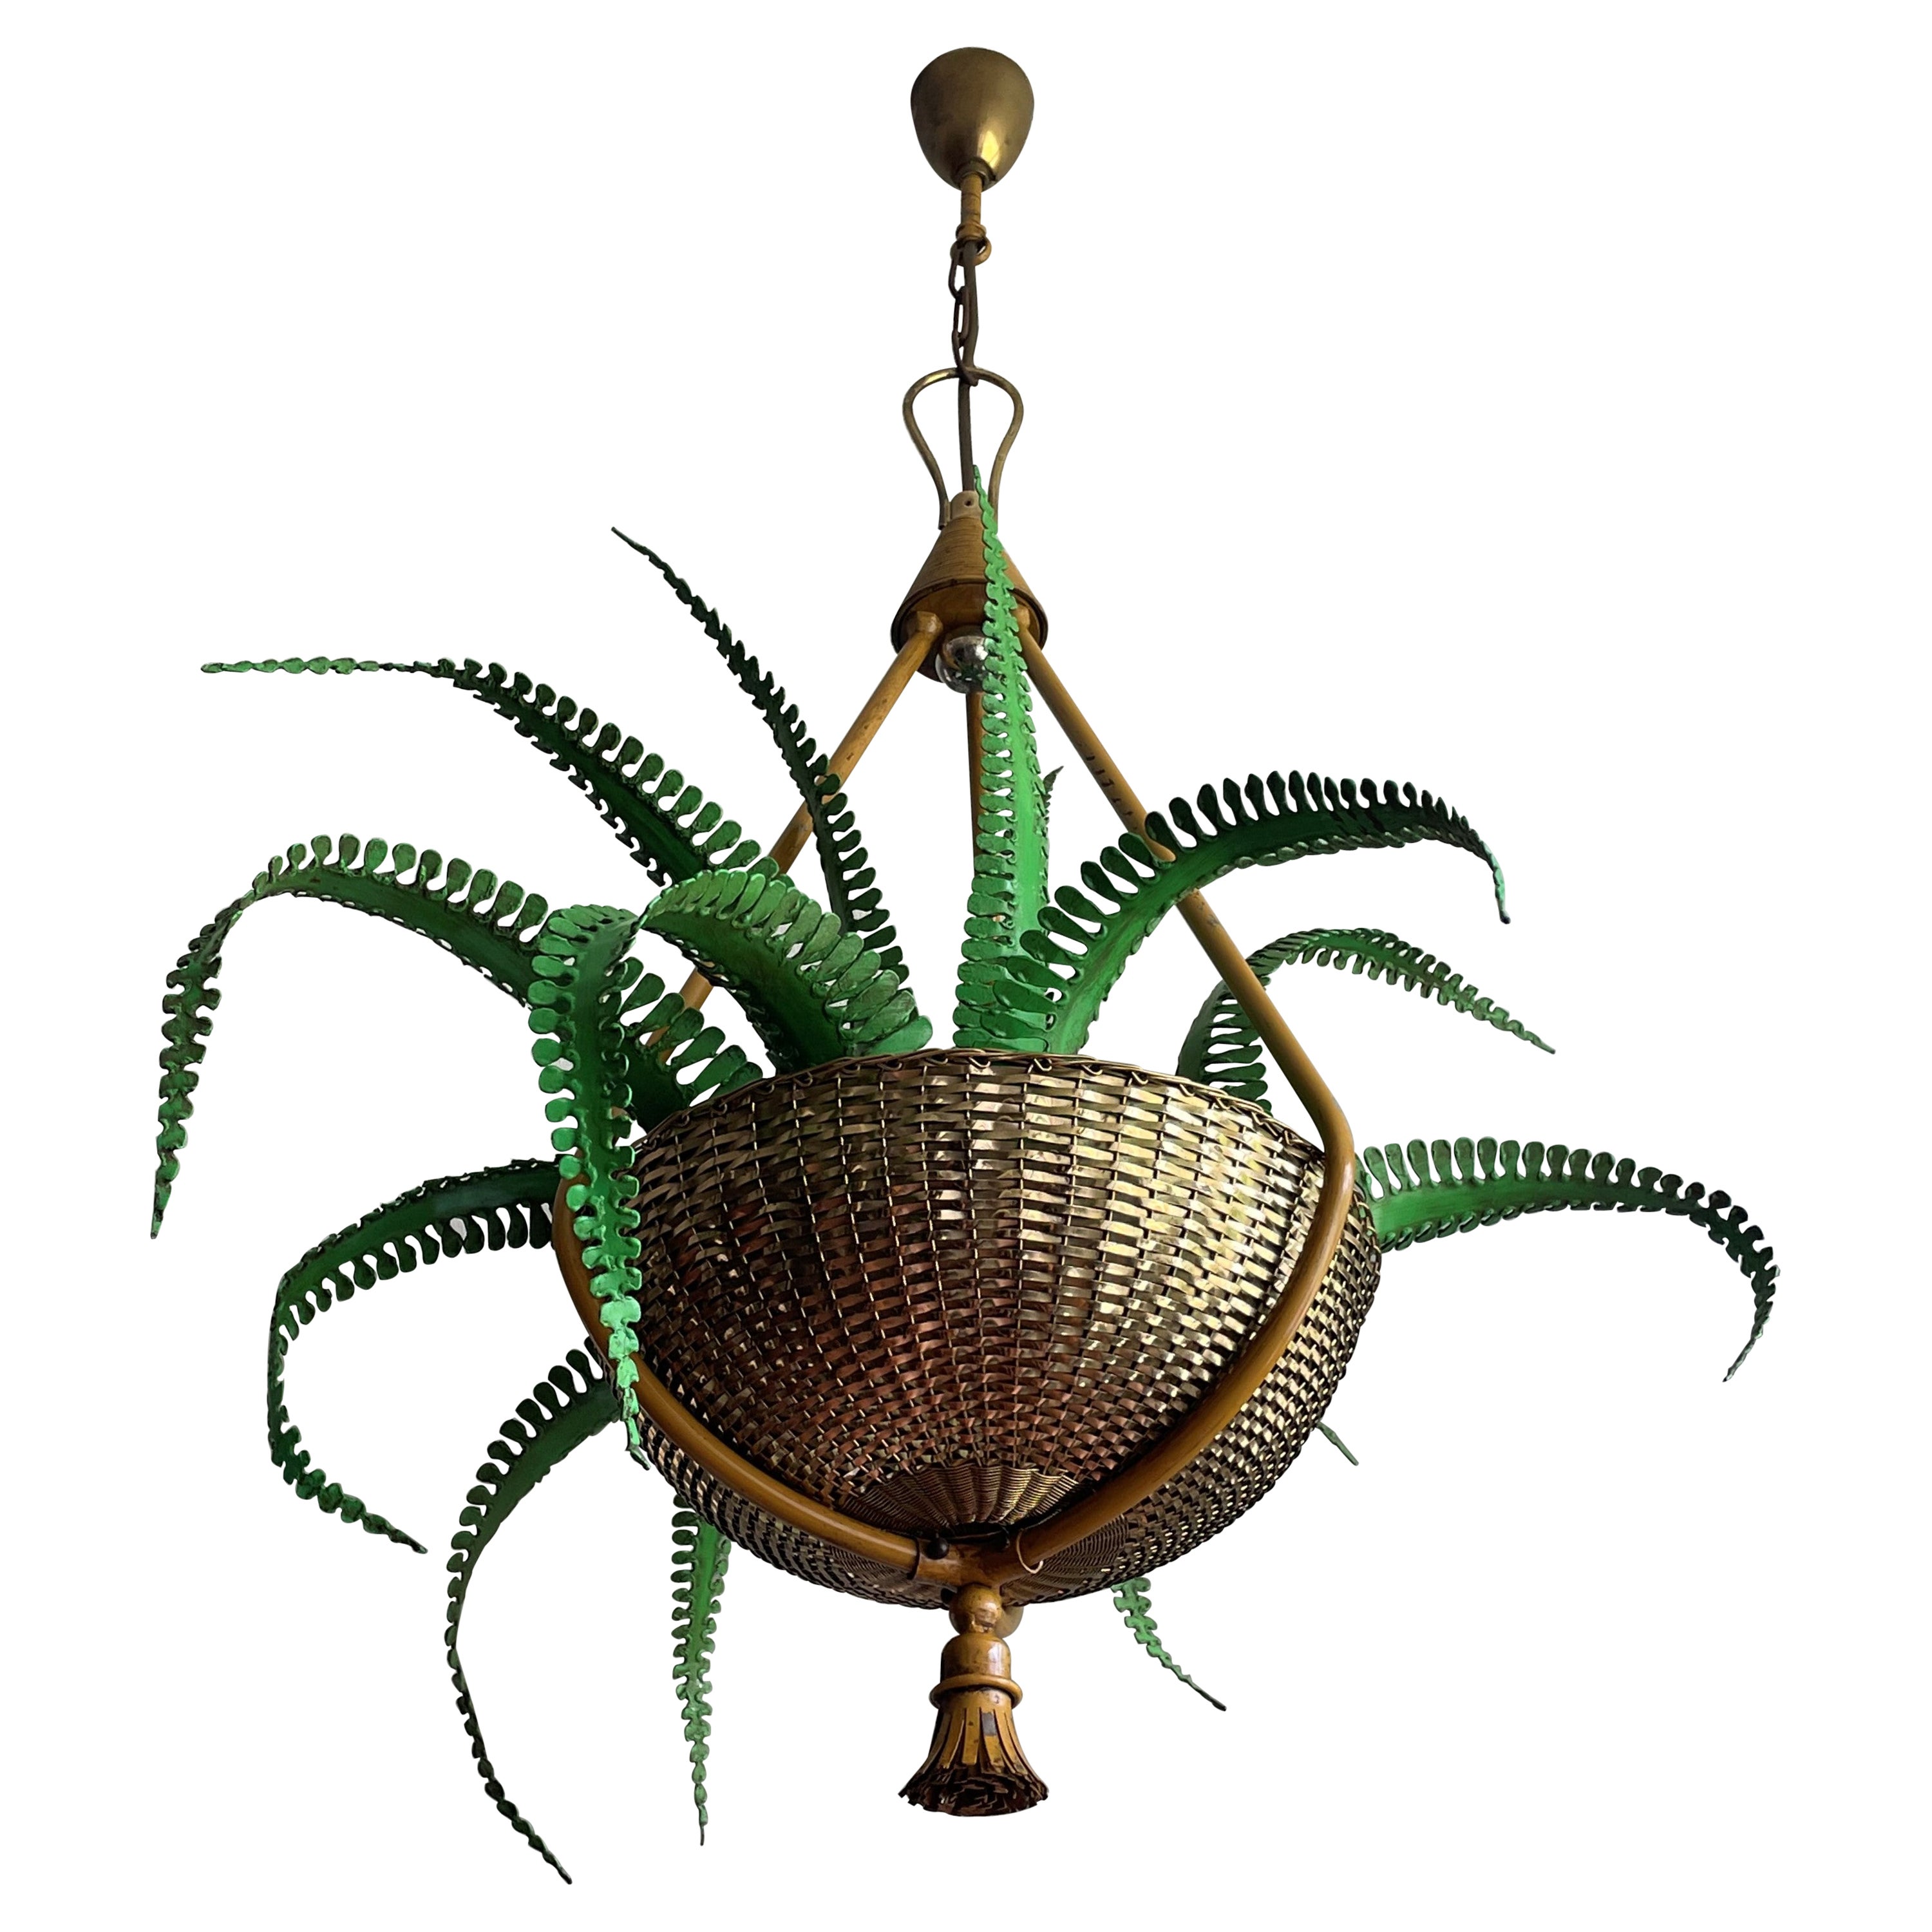 Very Rare Hollywood Regency Fern Chandelier Attr. To Maison Bagues, France 1950s